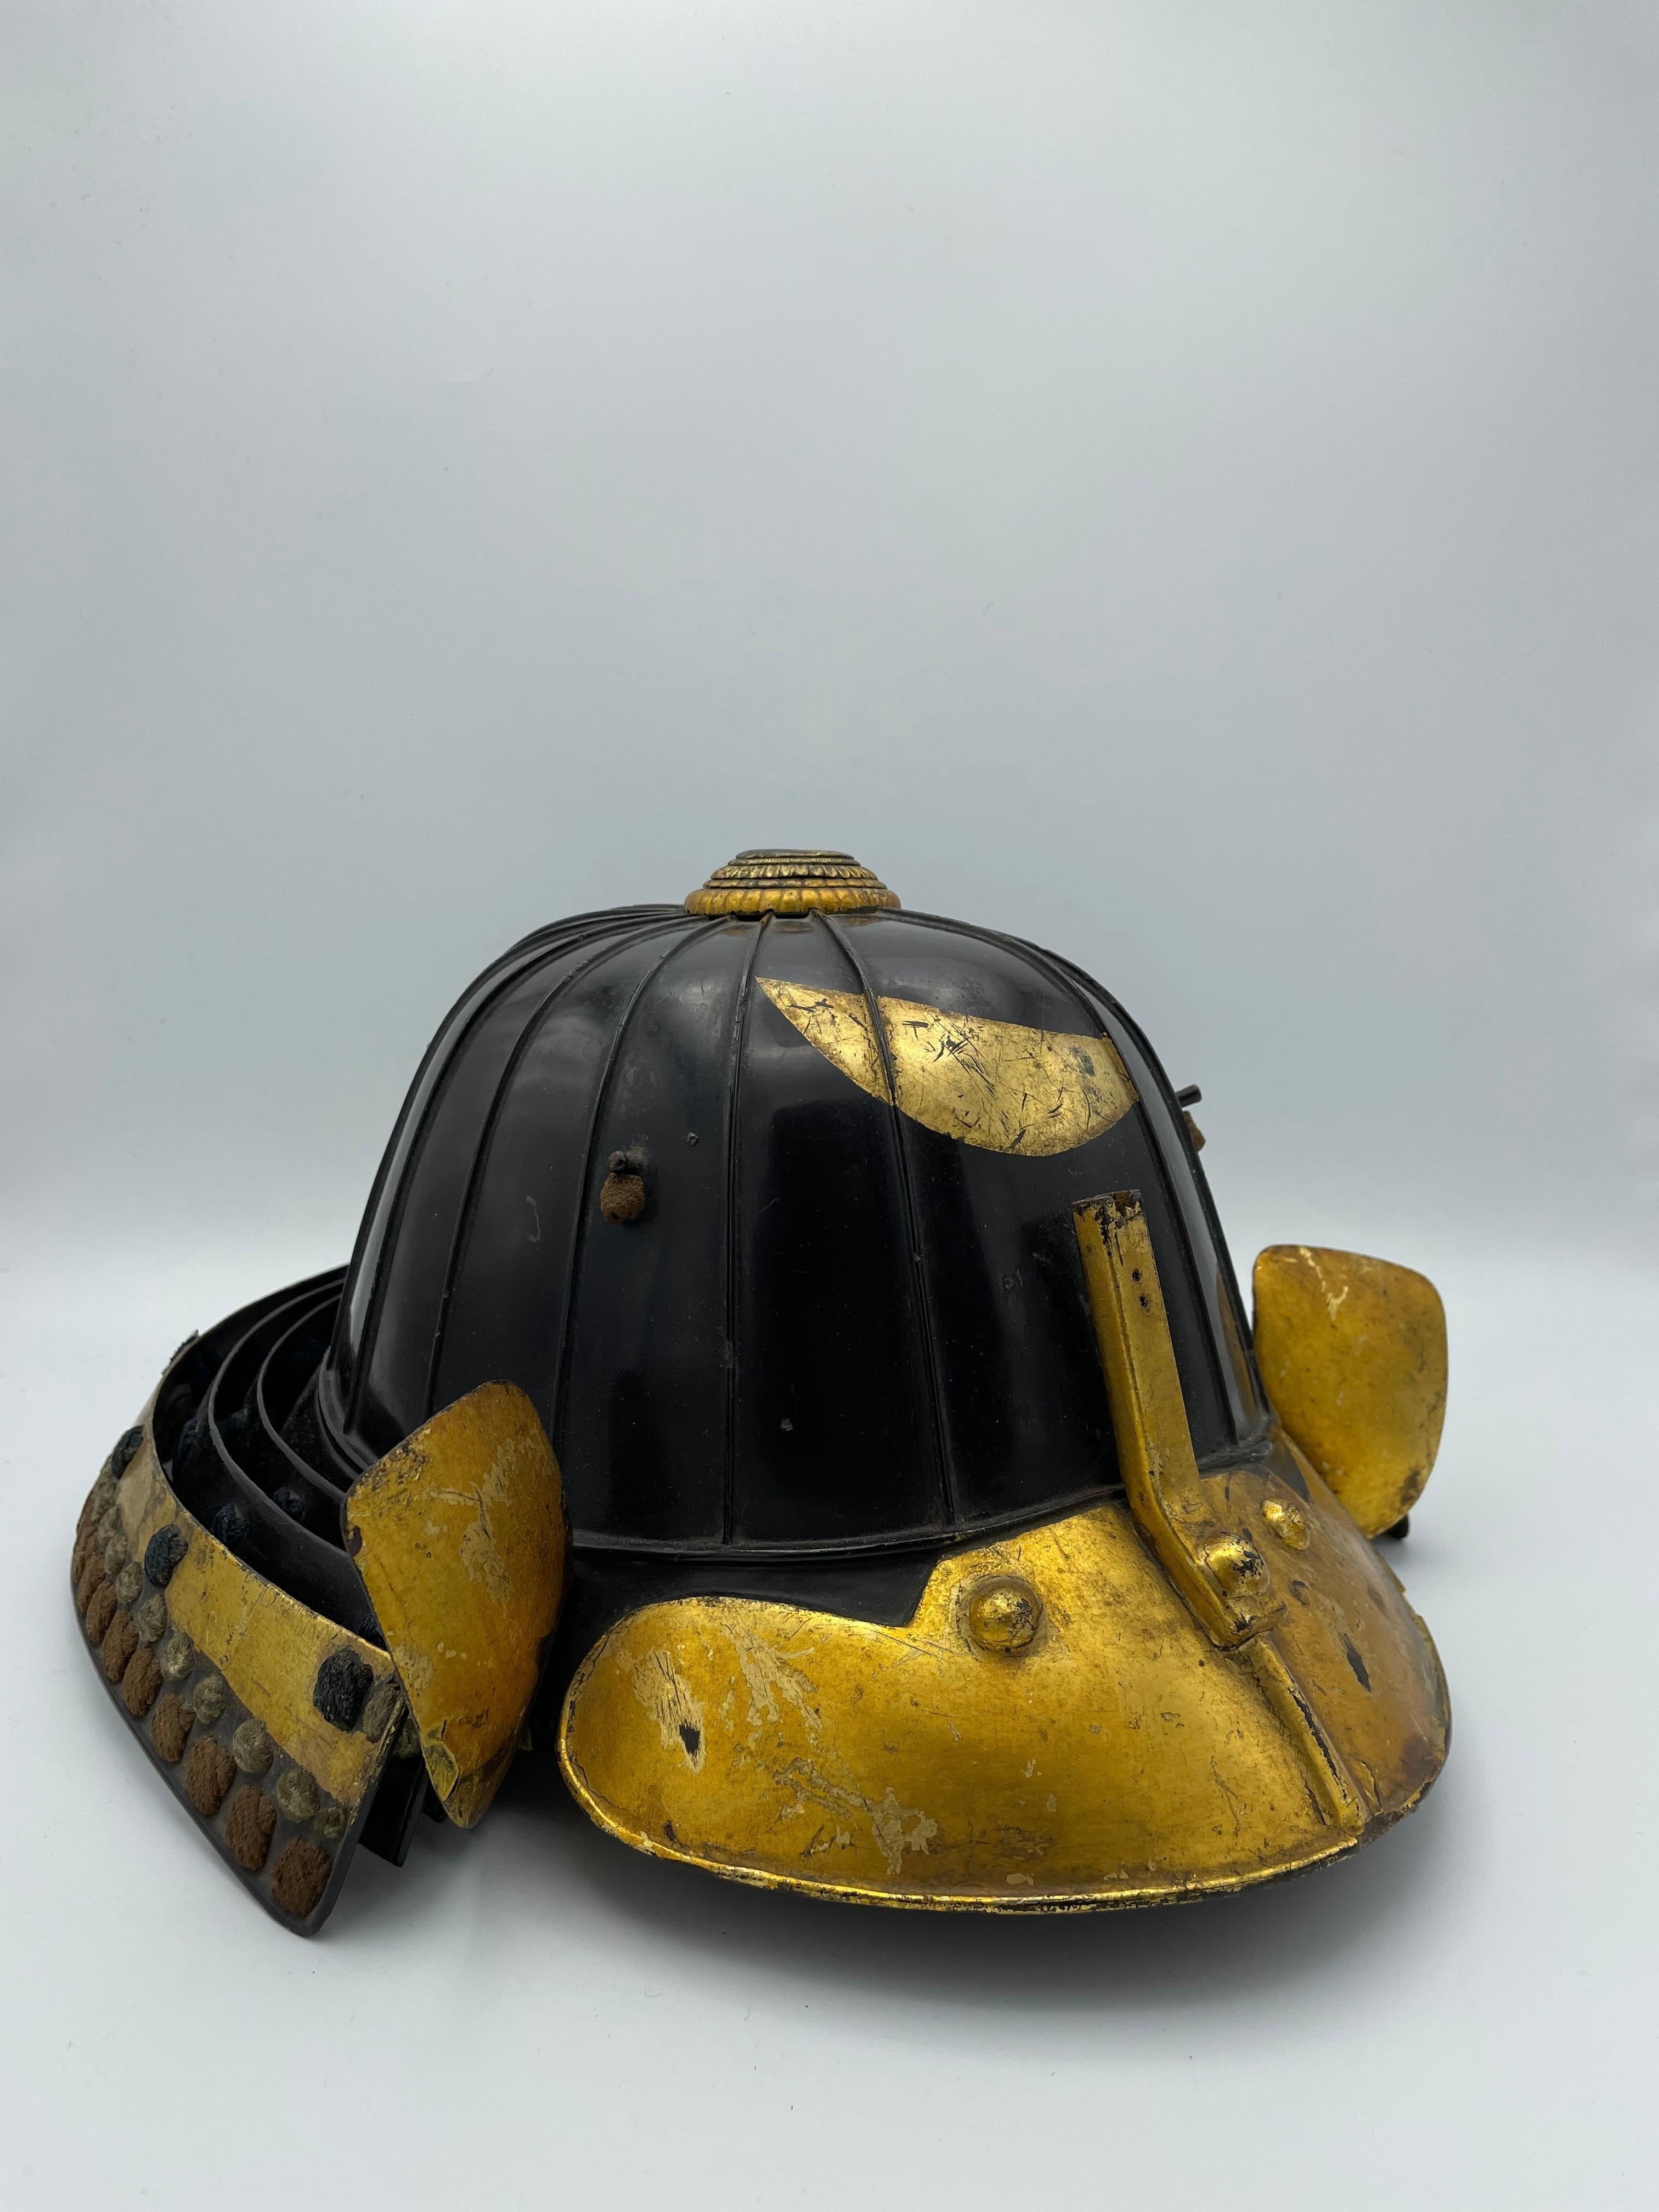 This is an antique combat helmet made around 1800s in Edo era in Japan.

Kabuto is a type of helmet first used by ancient Japanese warriors which, in later periods, became an important part of the traditional Japanese armour worn by the samurai